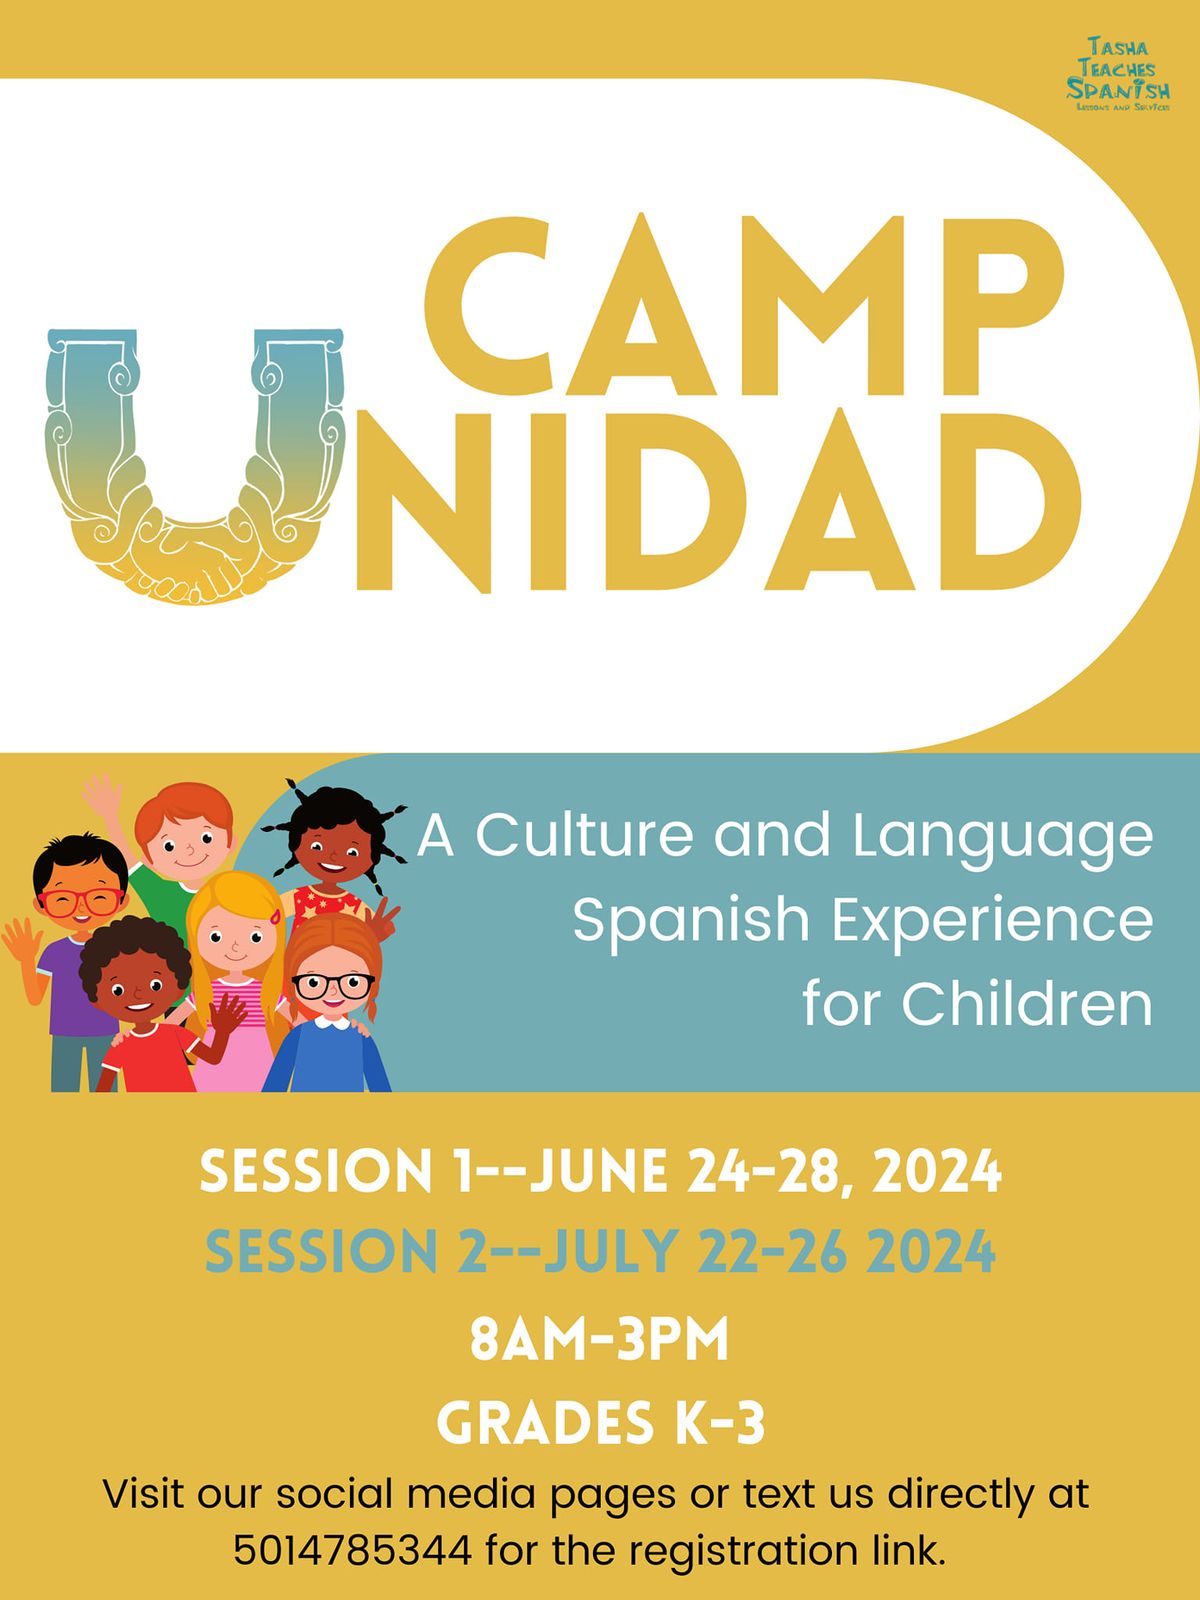 Camp Unidad--Verano 2024 (Session 1--Week of June 24, Session 2--Week of July 22)